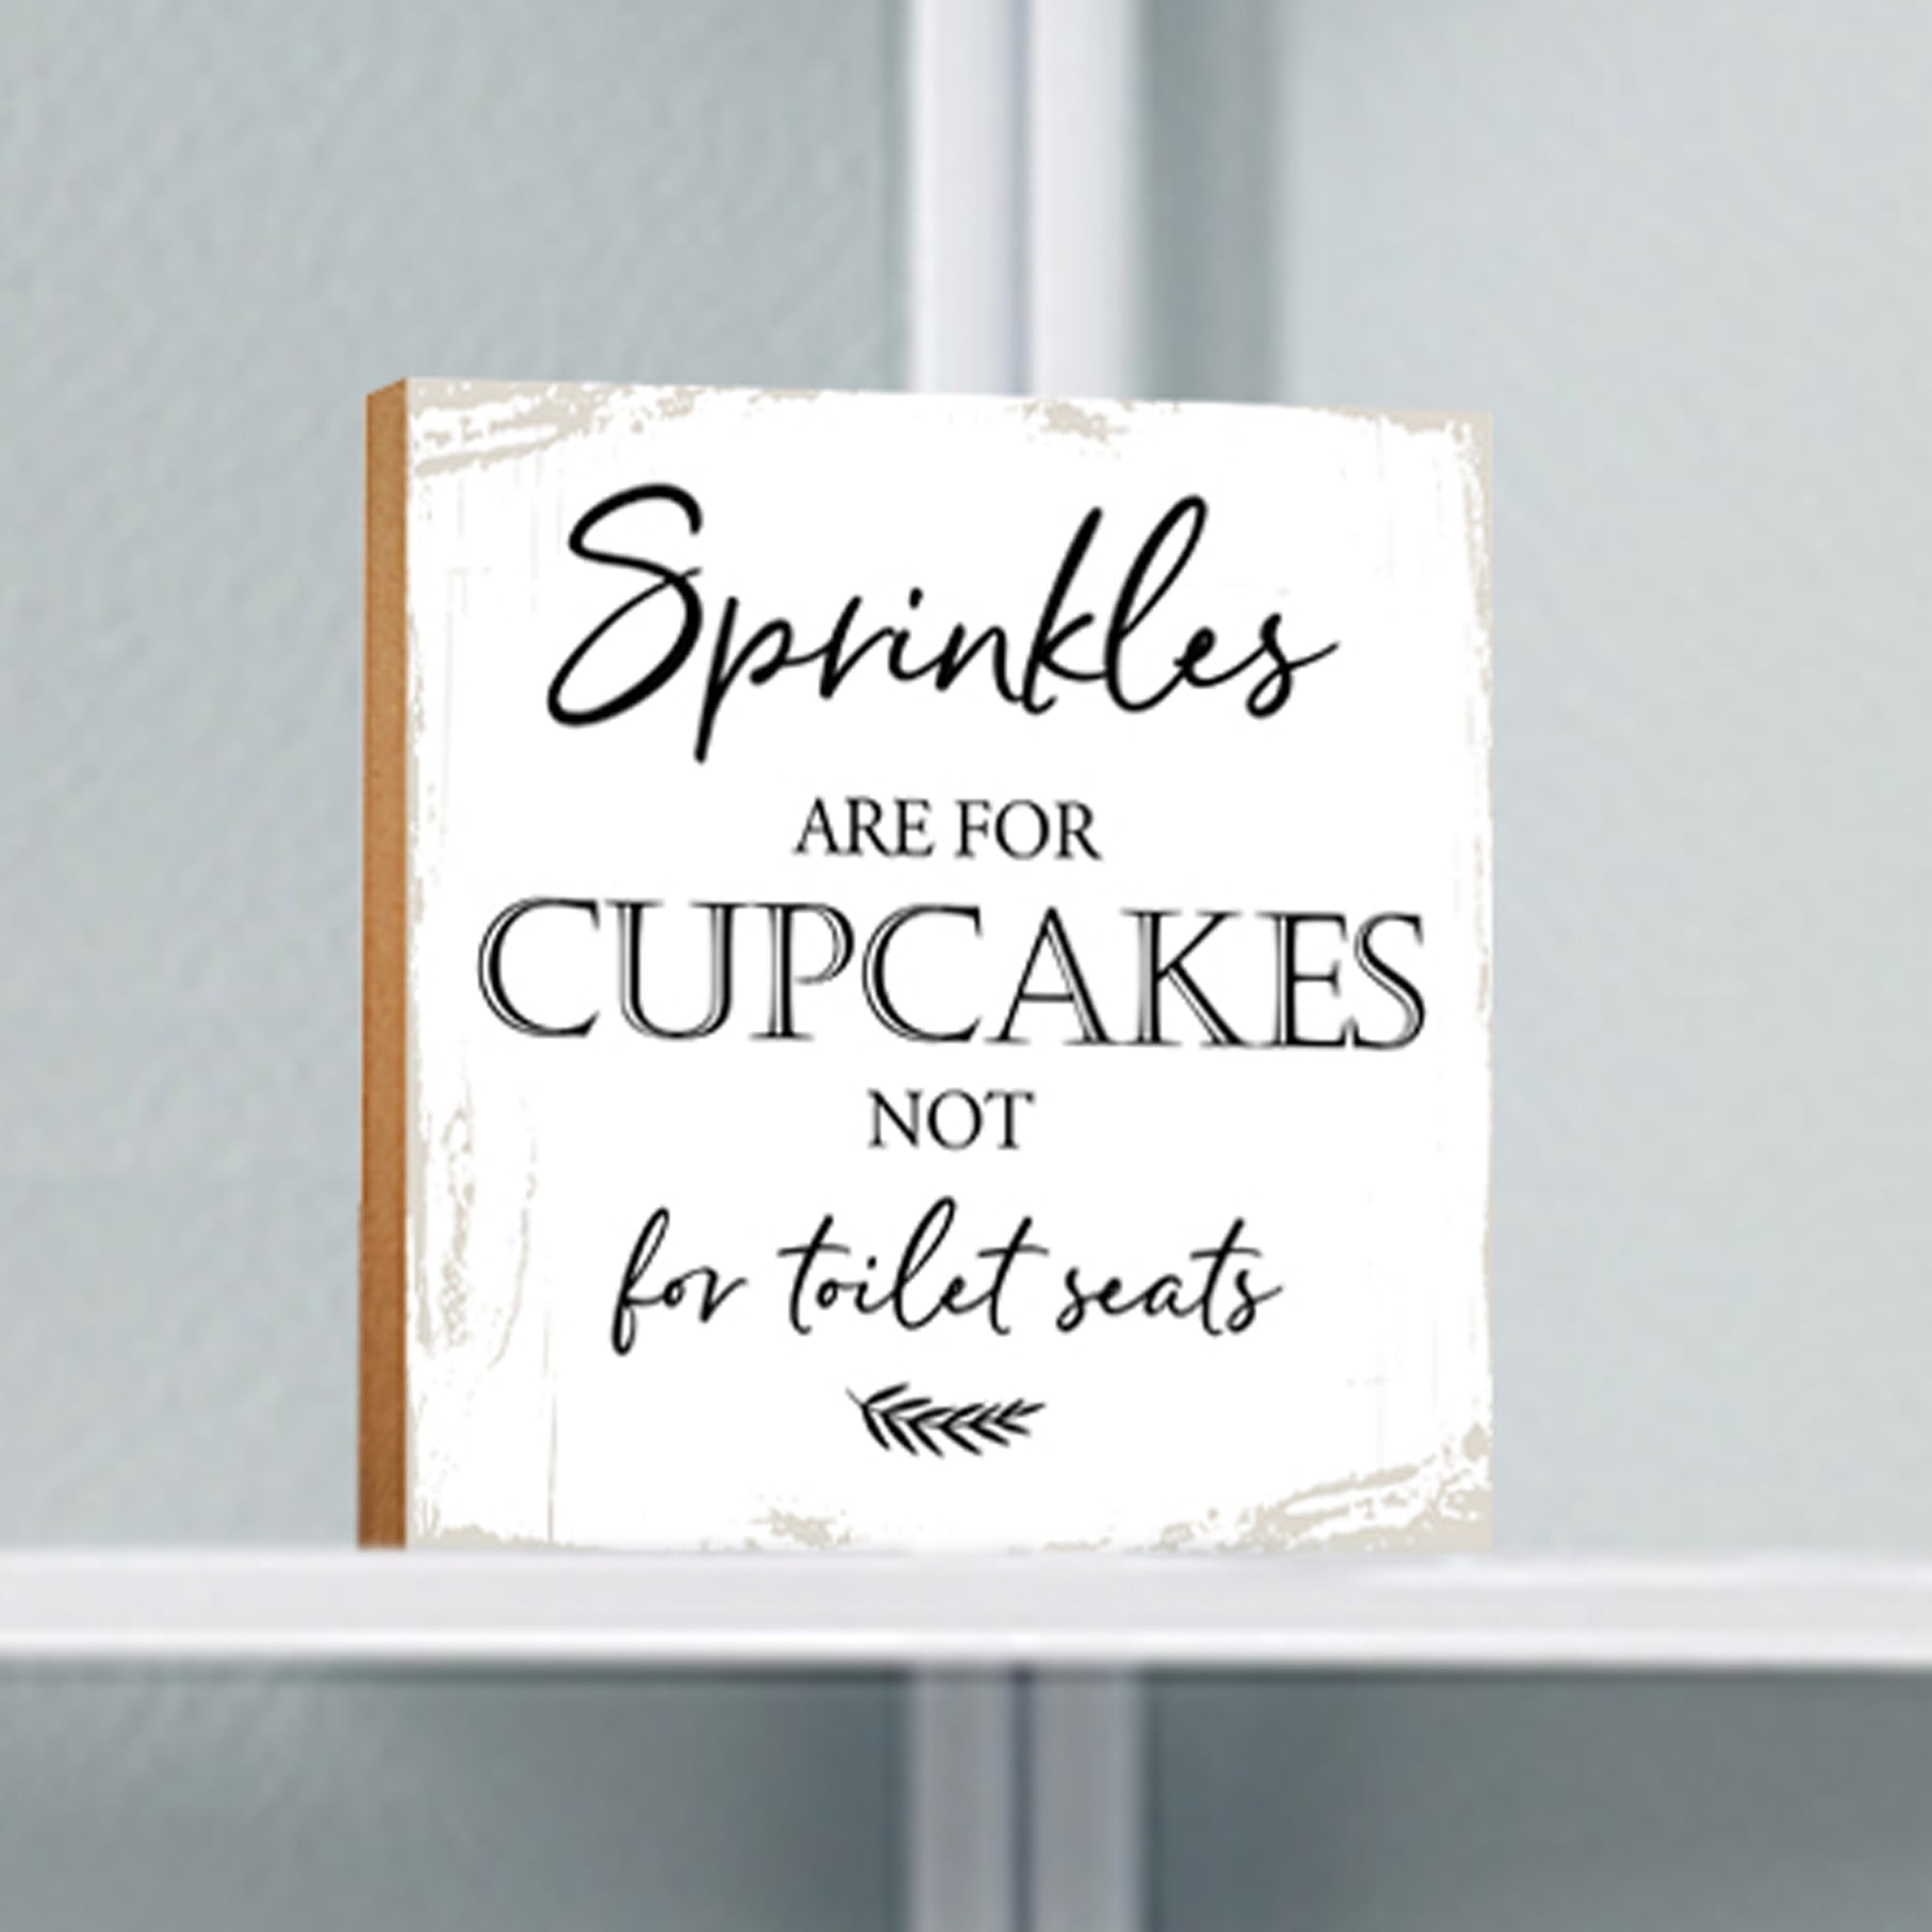 Wooden BATHROOM 6x6 Block shelf decor (Sprinkles Are For Cupcakes) Inspirational Plaque Tabletop and Family Home Decoration